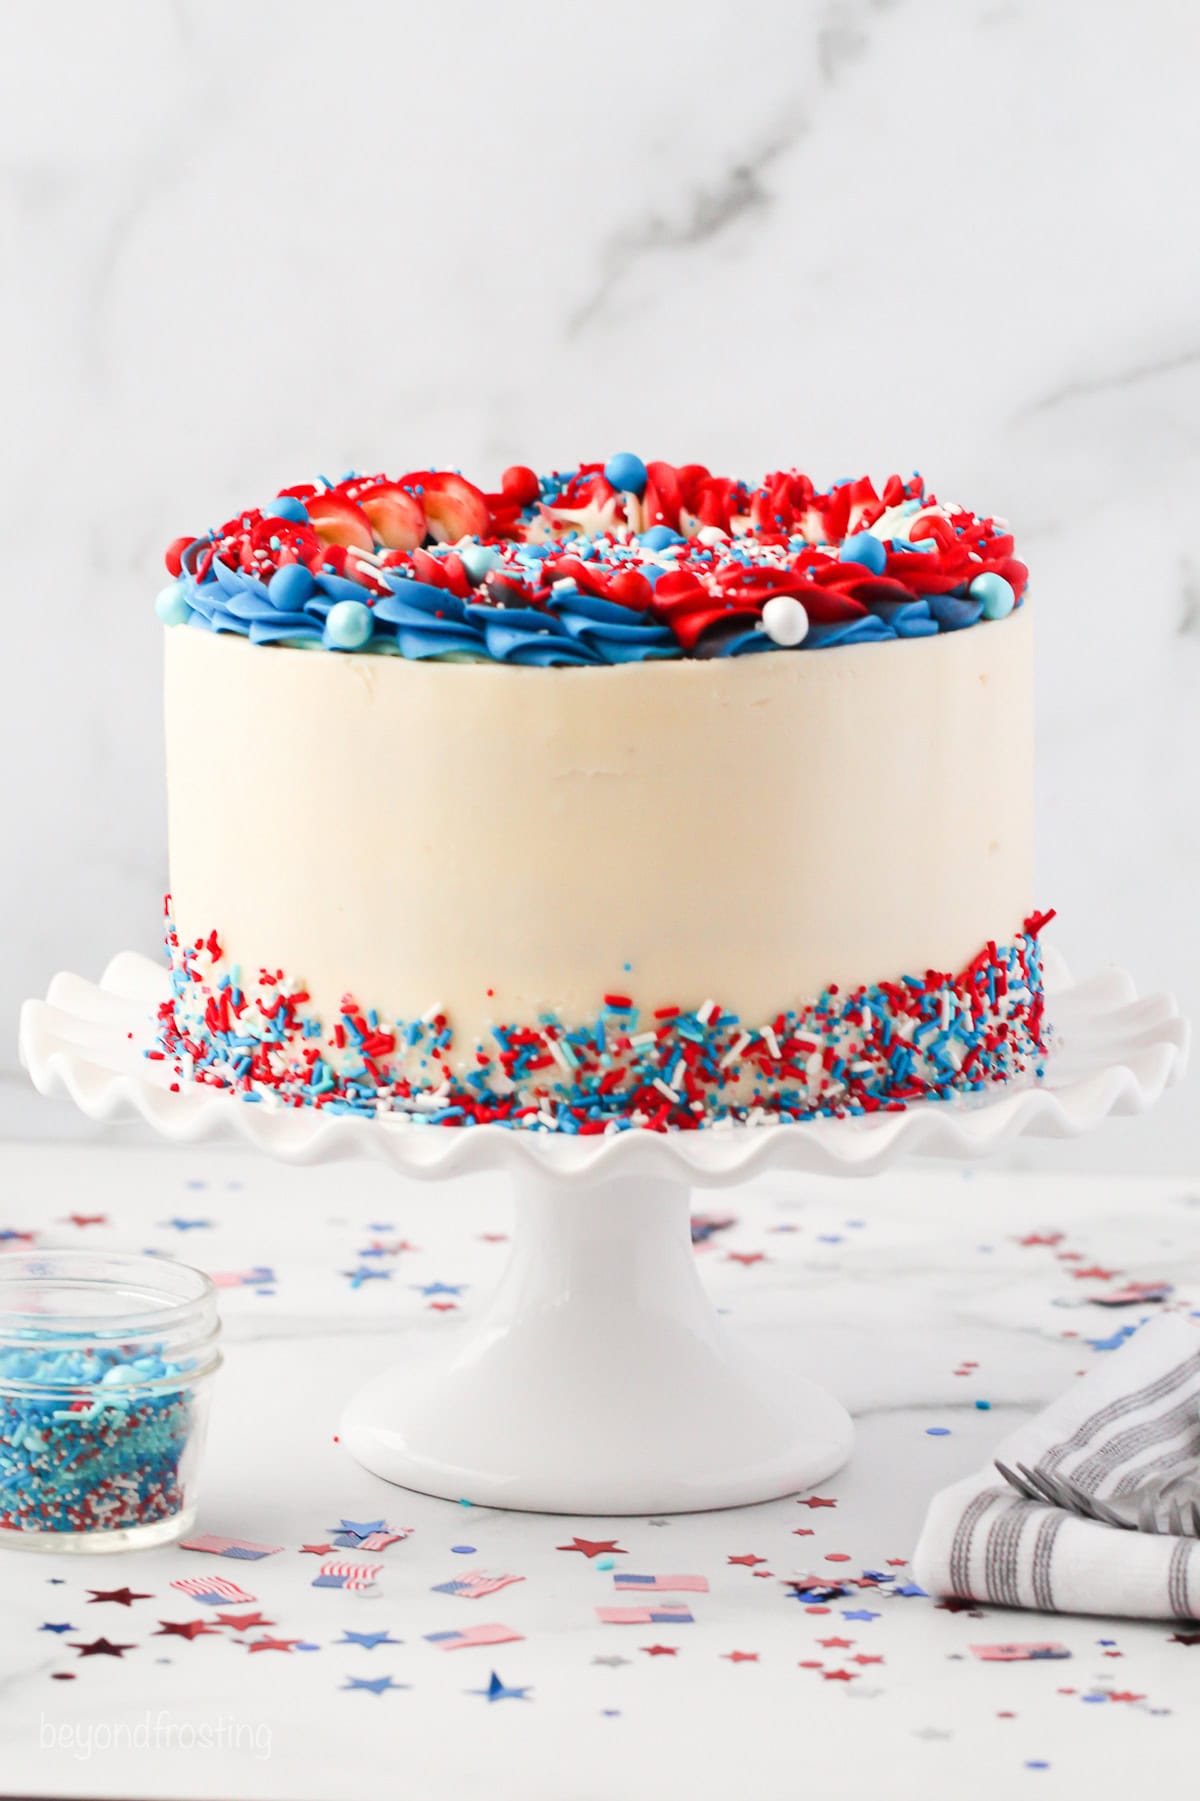 A frosted red white and blue layer cake decorated with piped red and blue frosting and a skirt of sprinkles on a cake stand.